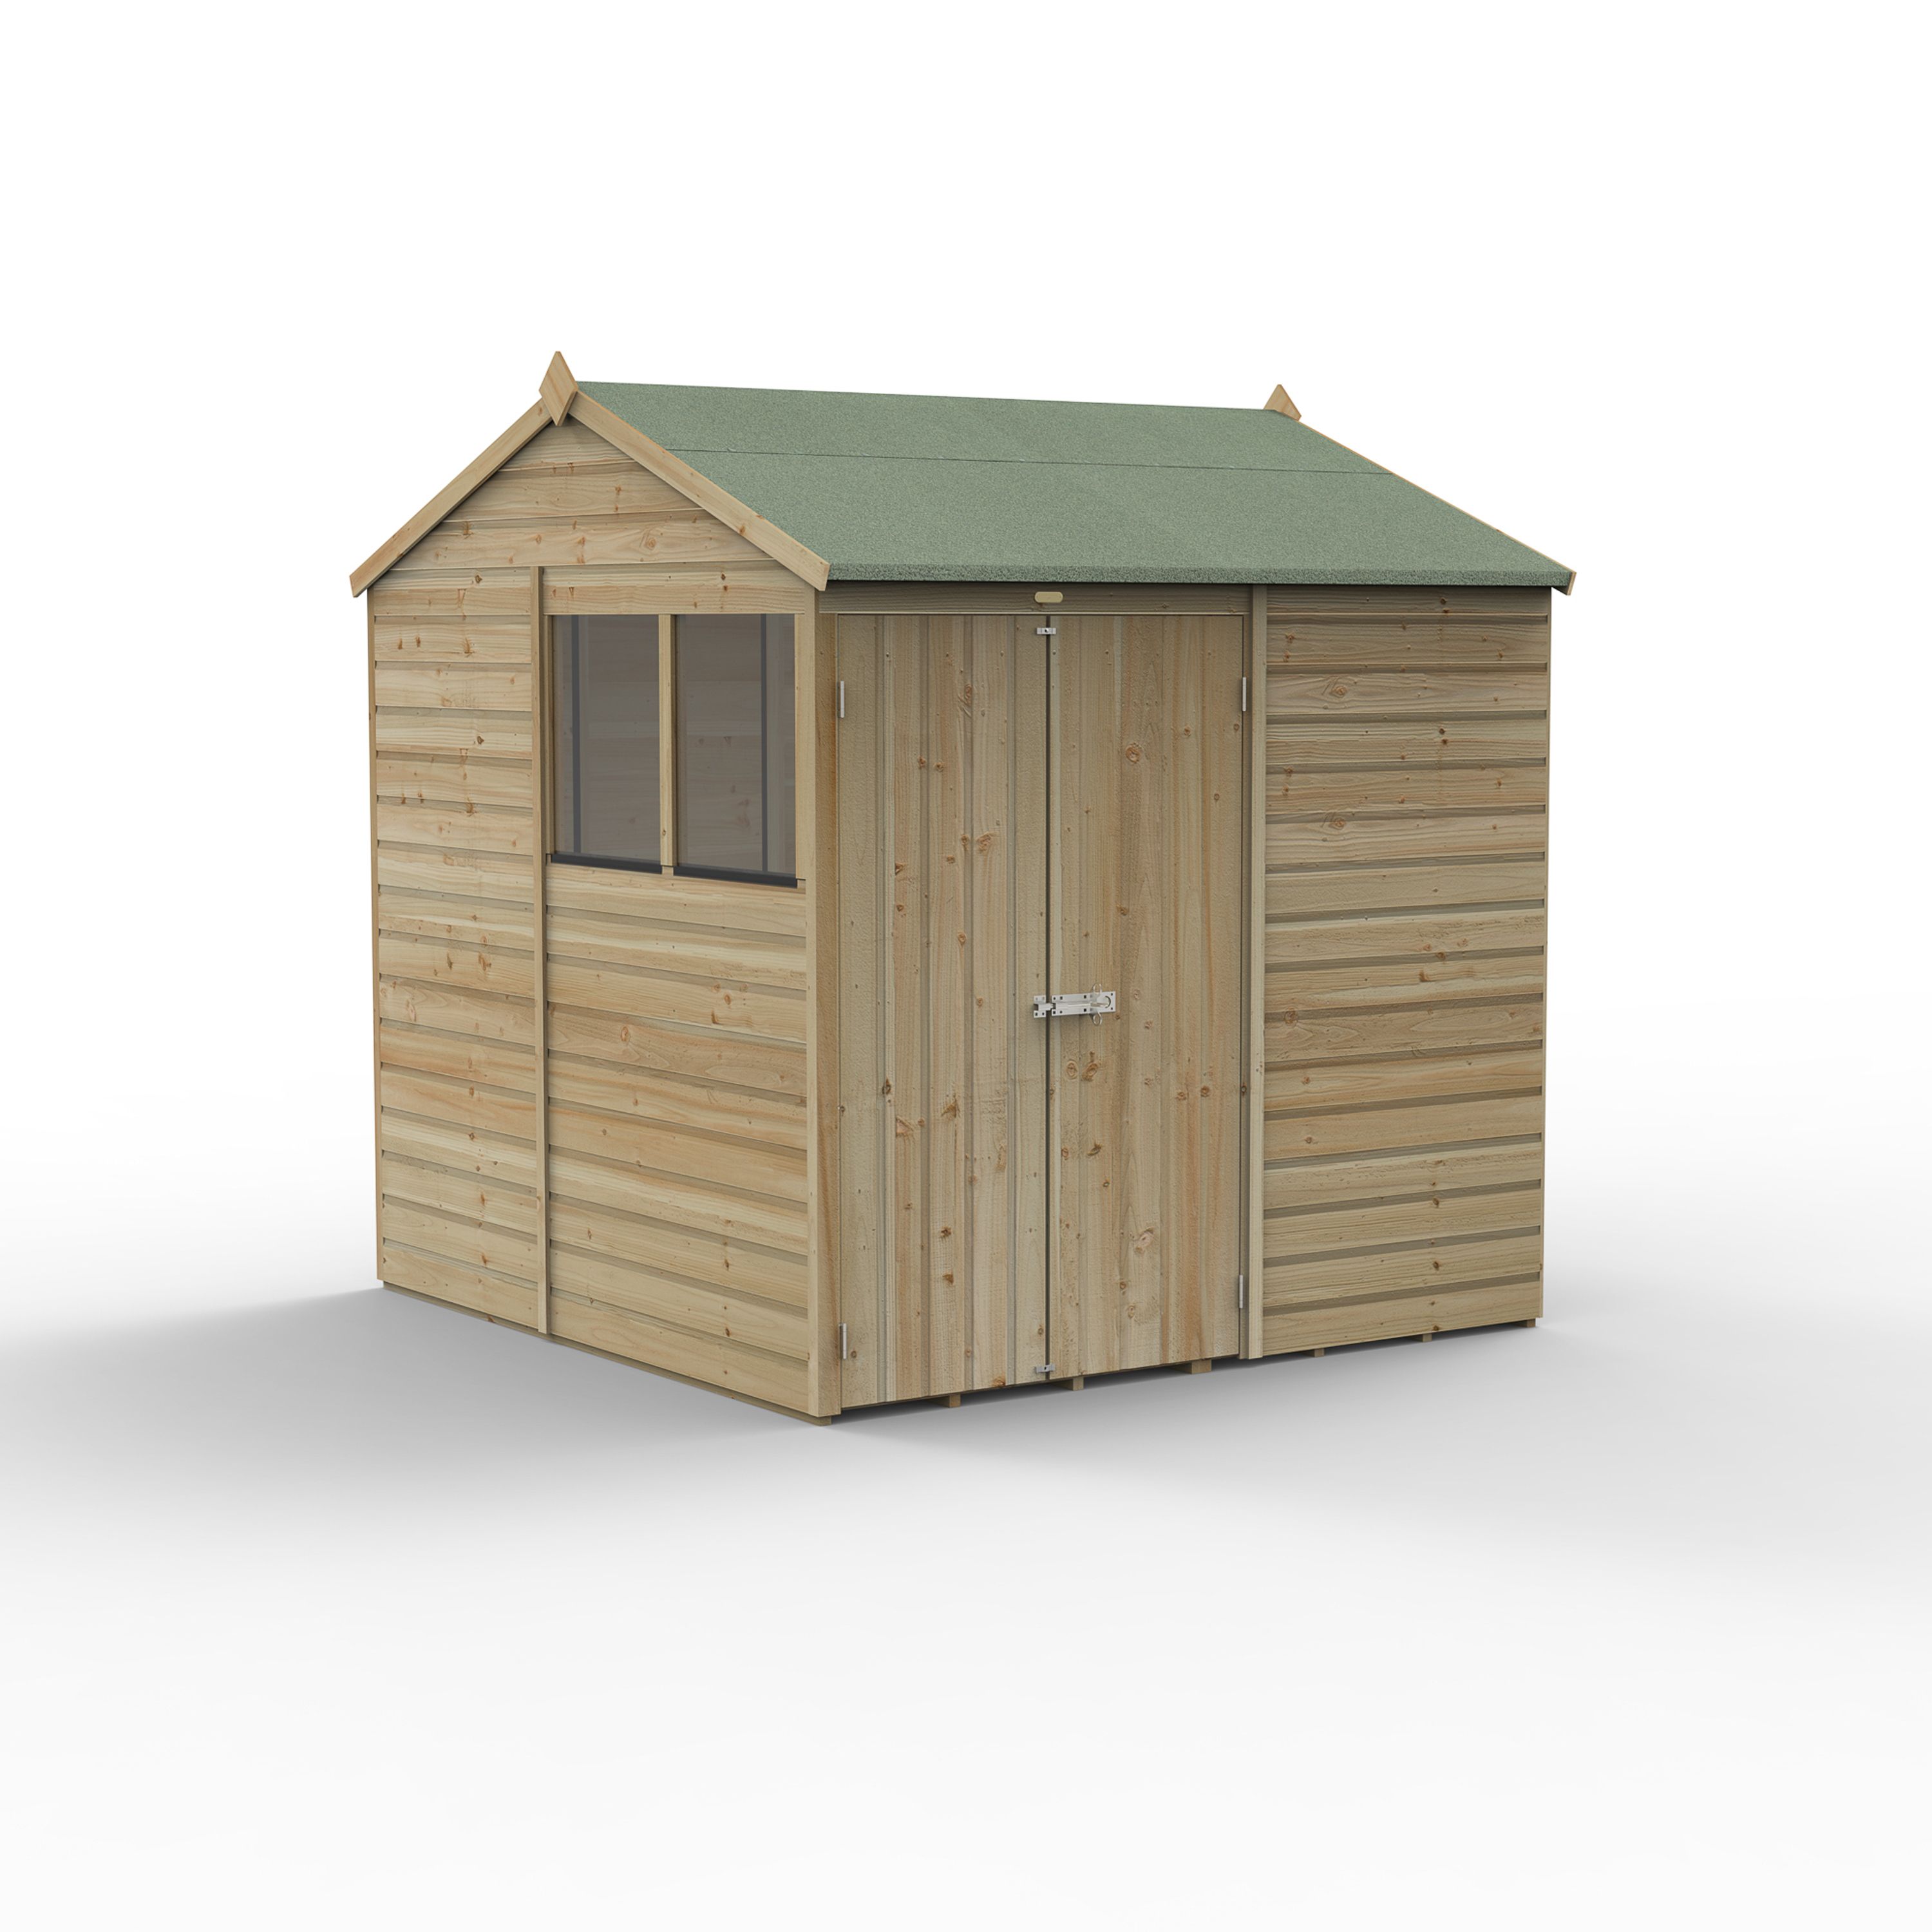 Forest Garden Beckwood 7x7 ft Reverse apex Natural timber Wooden 2 door Shed with floor & 2 windows (Base included)